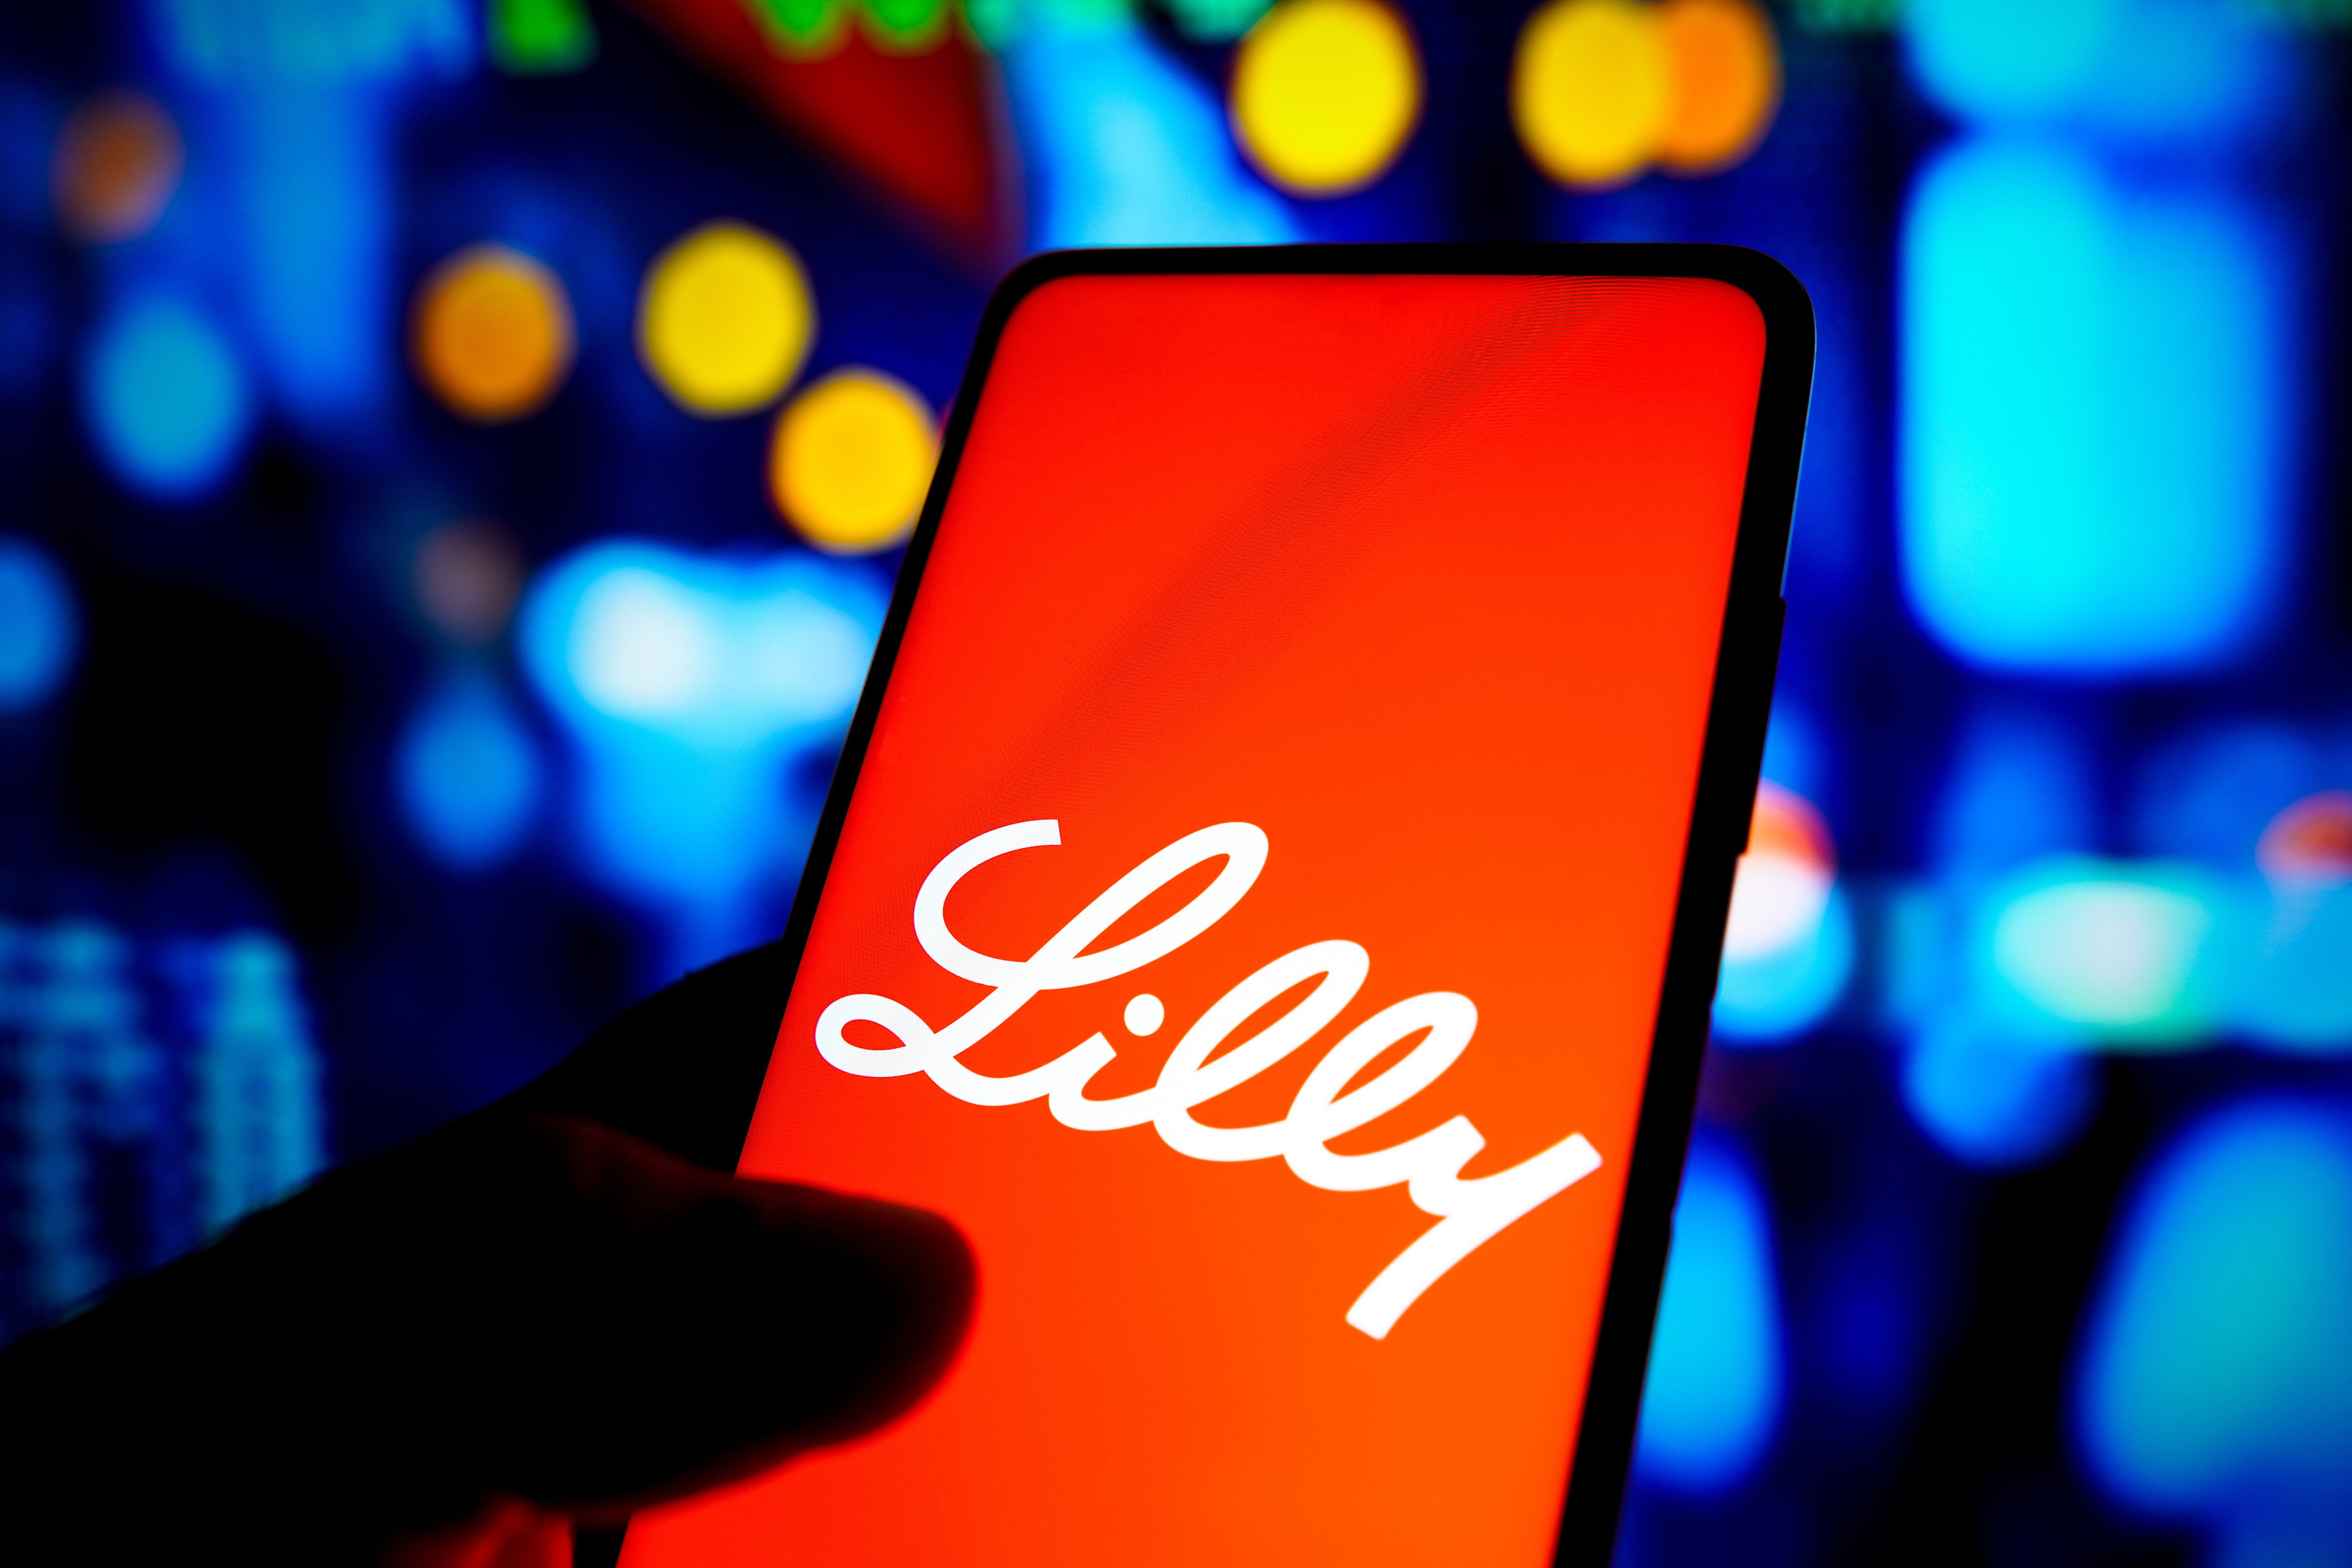 A hand holds an iPhone in front of a blurred multicolored background. The iPhone screen displays the Eli Lilly company logo.